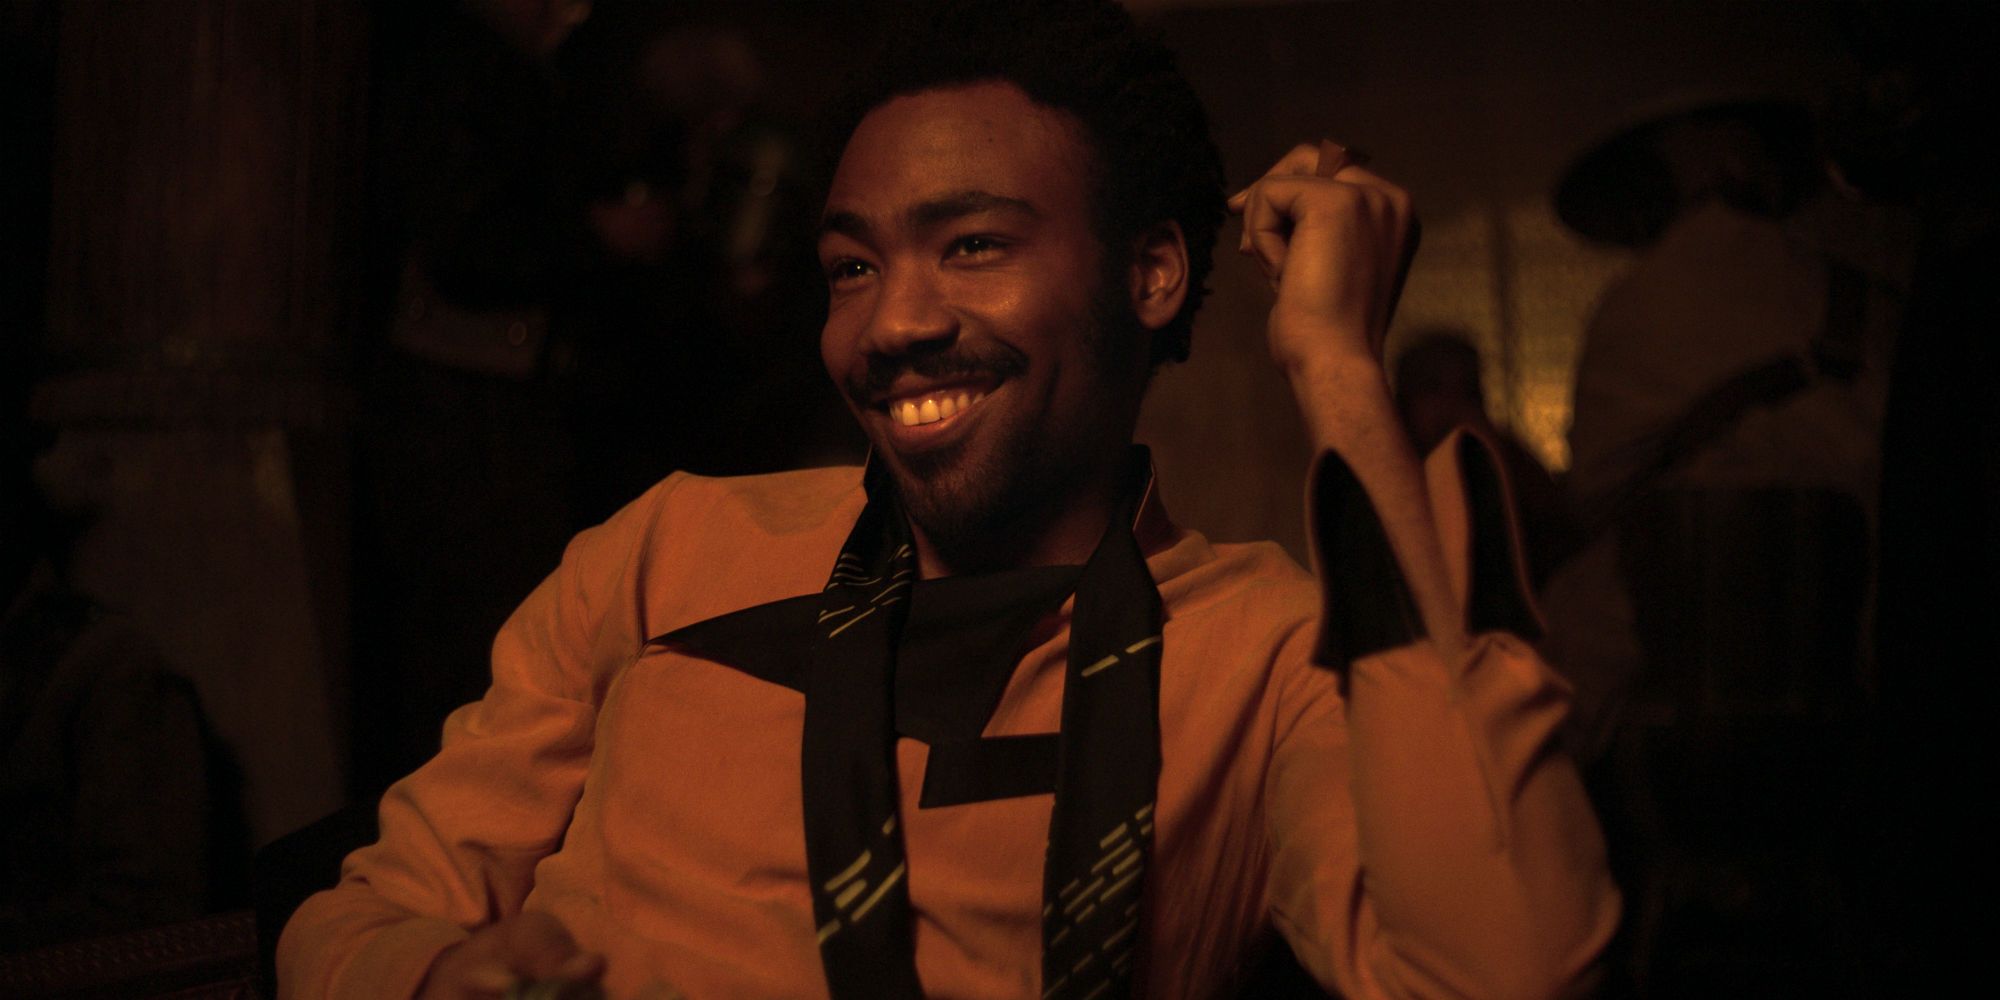 Solo A Star Wars Story - Donald Glover as Lando Calrissian